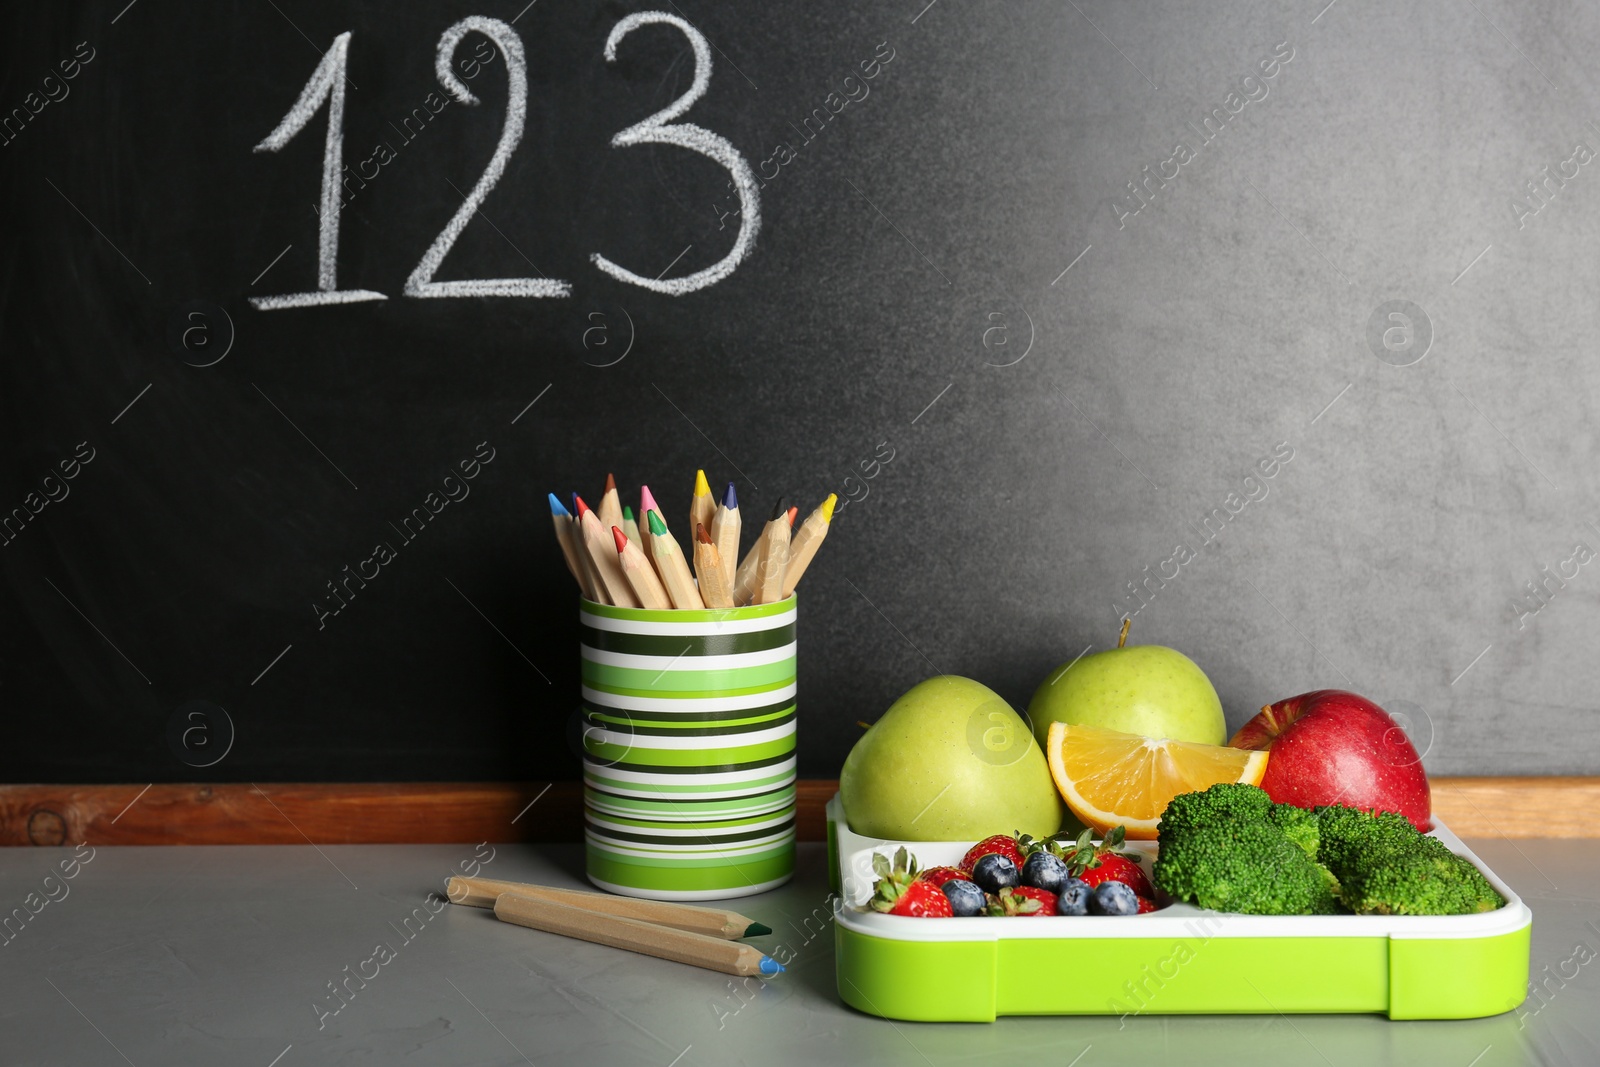 Photo of Healthy food for school child in lunch box and stationery on table near blackboard with chalk written numbers